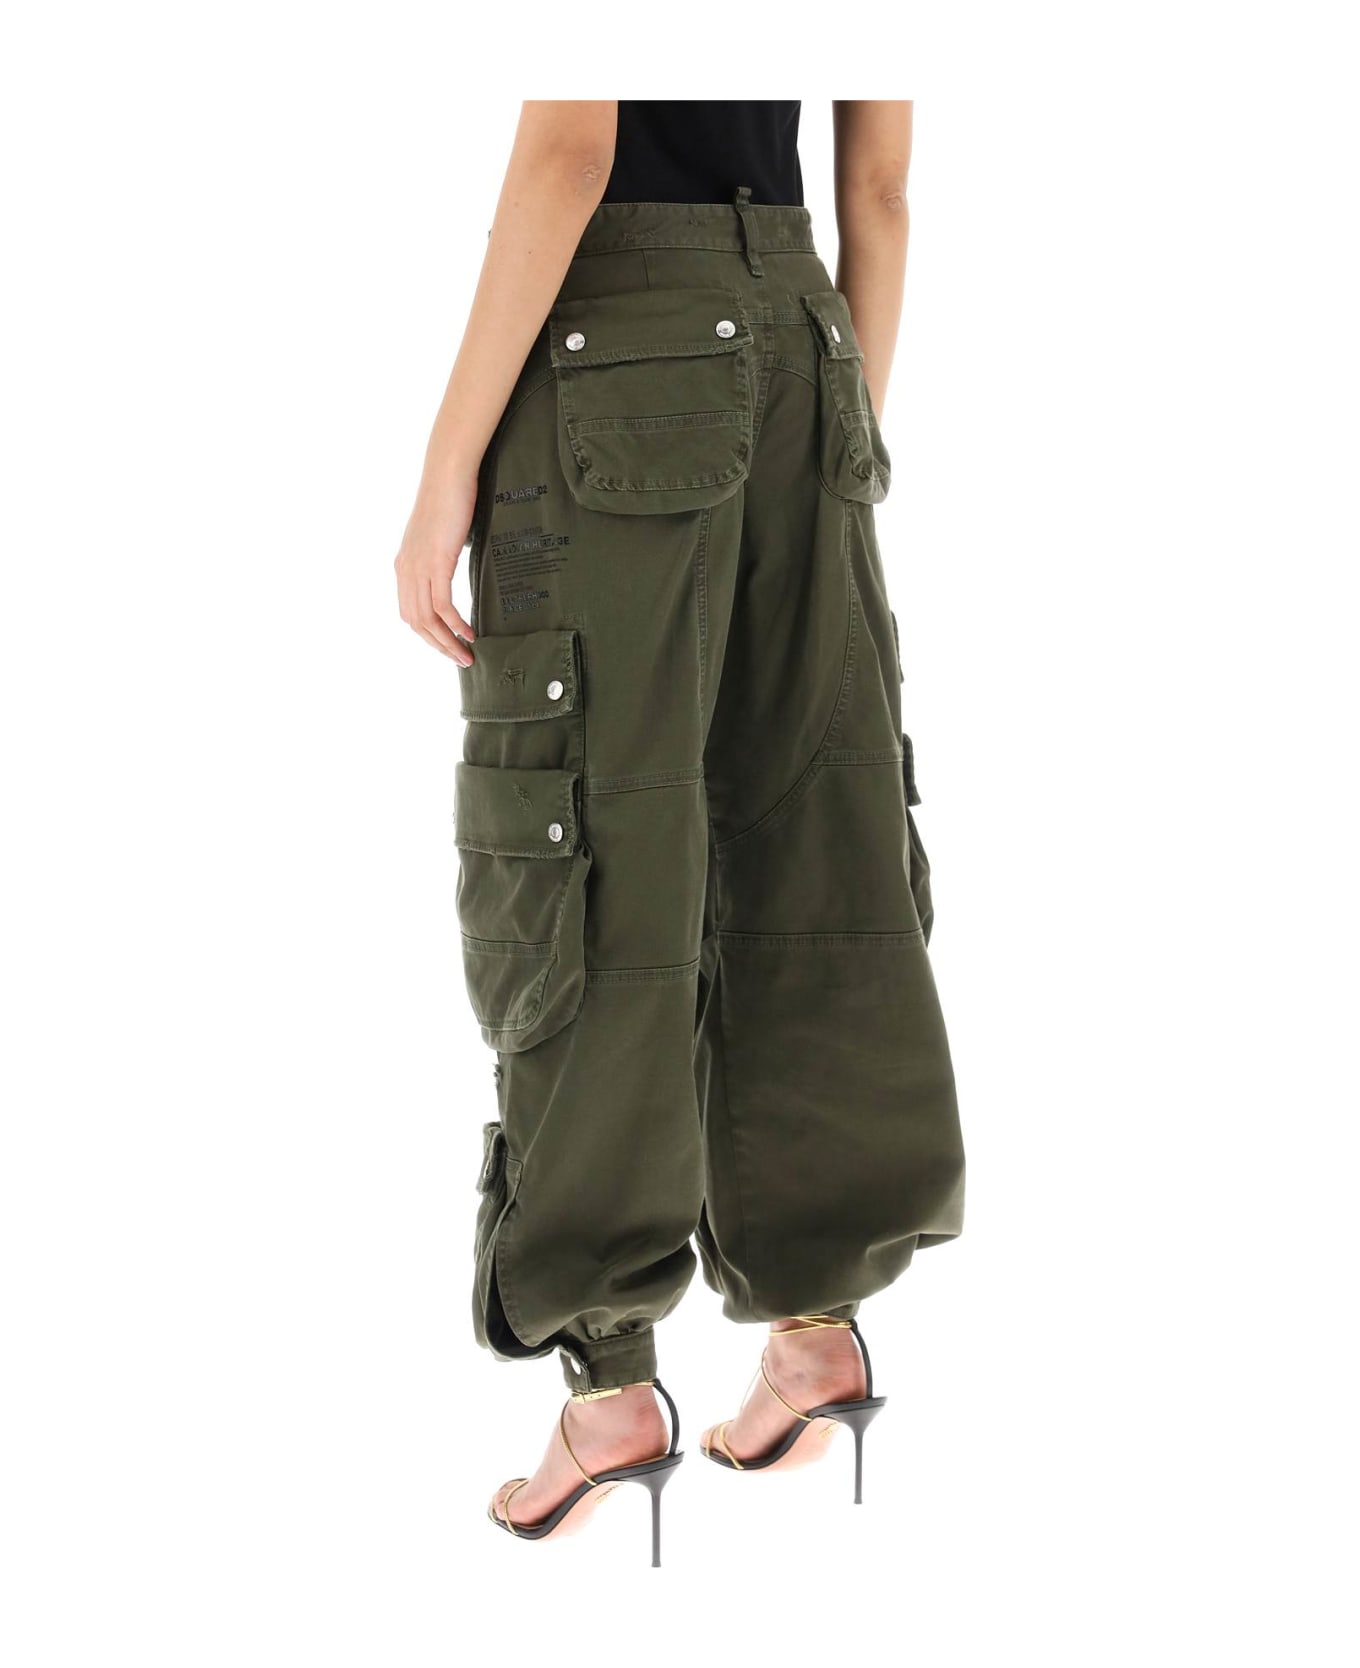 Dsquared2 Pocket Detailed Cargo Pants - MILITARY GREEN (Green) ボトムス